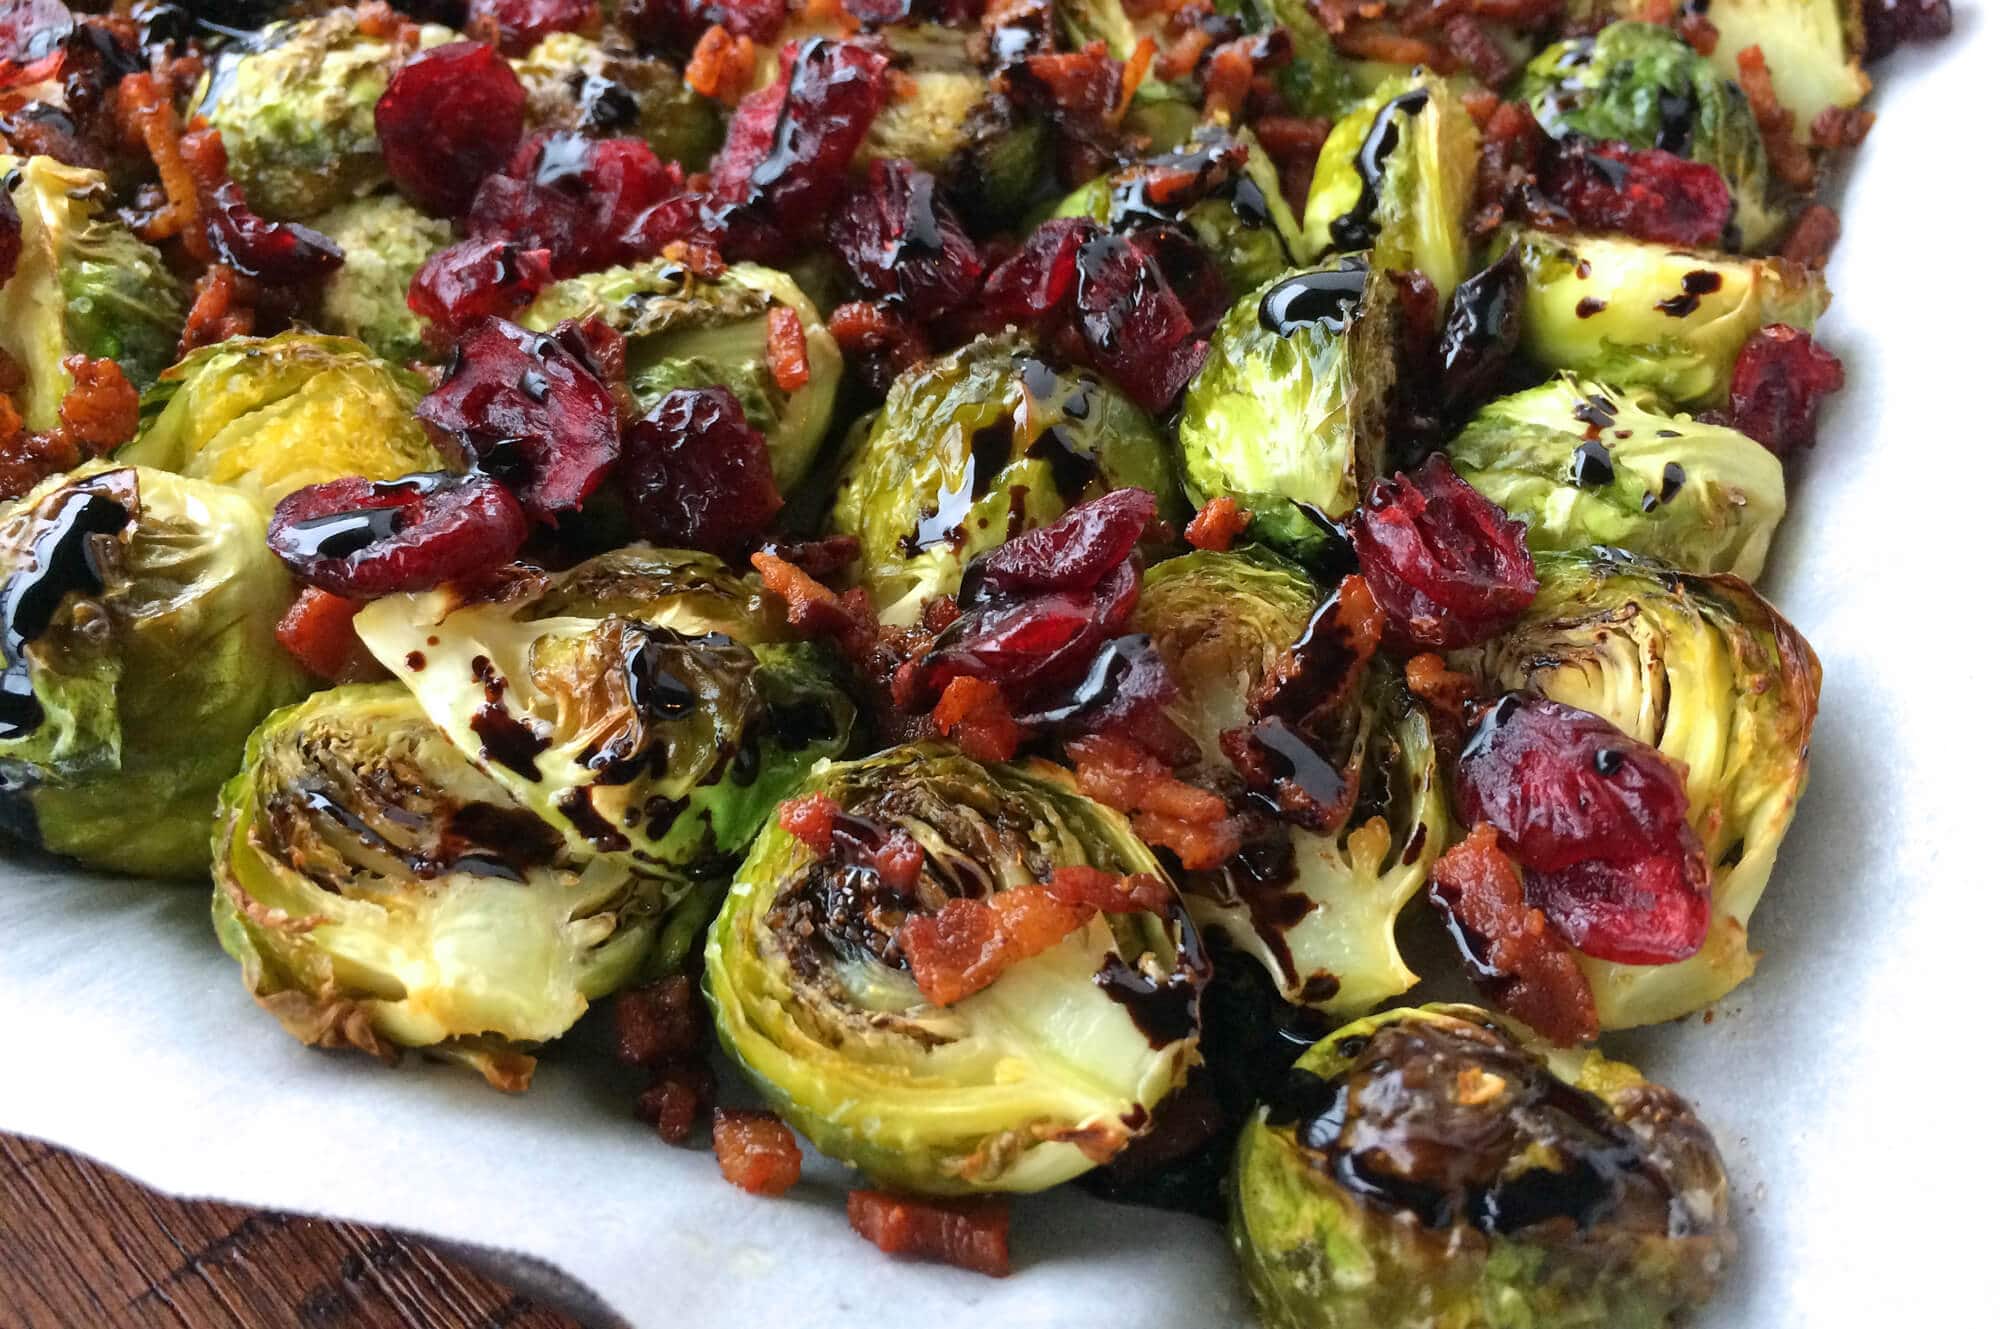 Brussel's Sprouts, Red Pepper and Avocado Salad